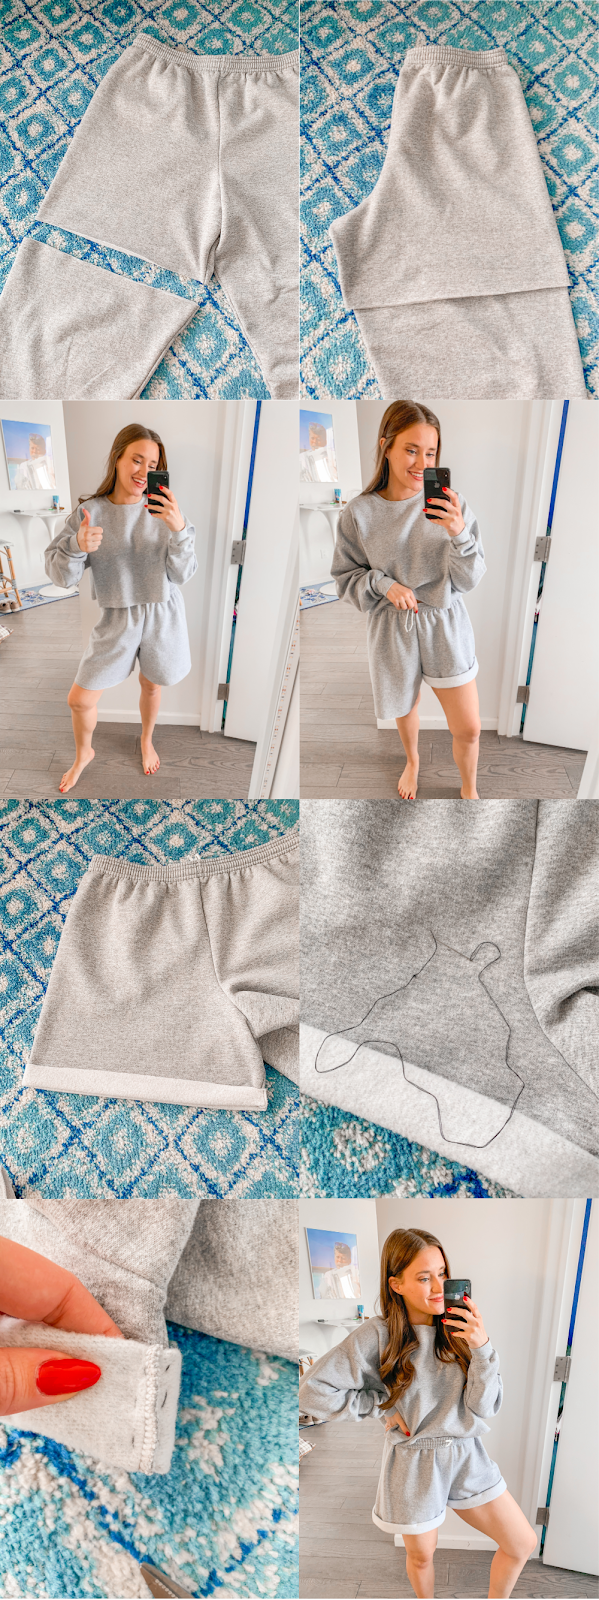 DIY Short Sweat Set | Connecticut Fashion and Lifestyle Blog | Covering ...